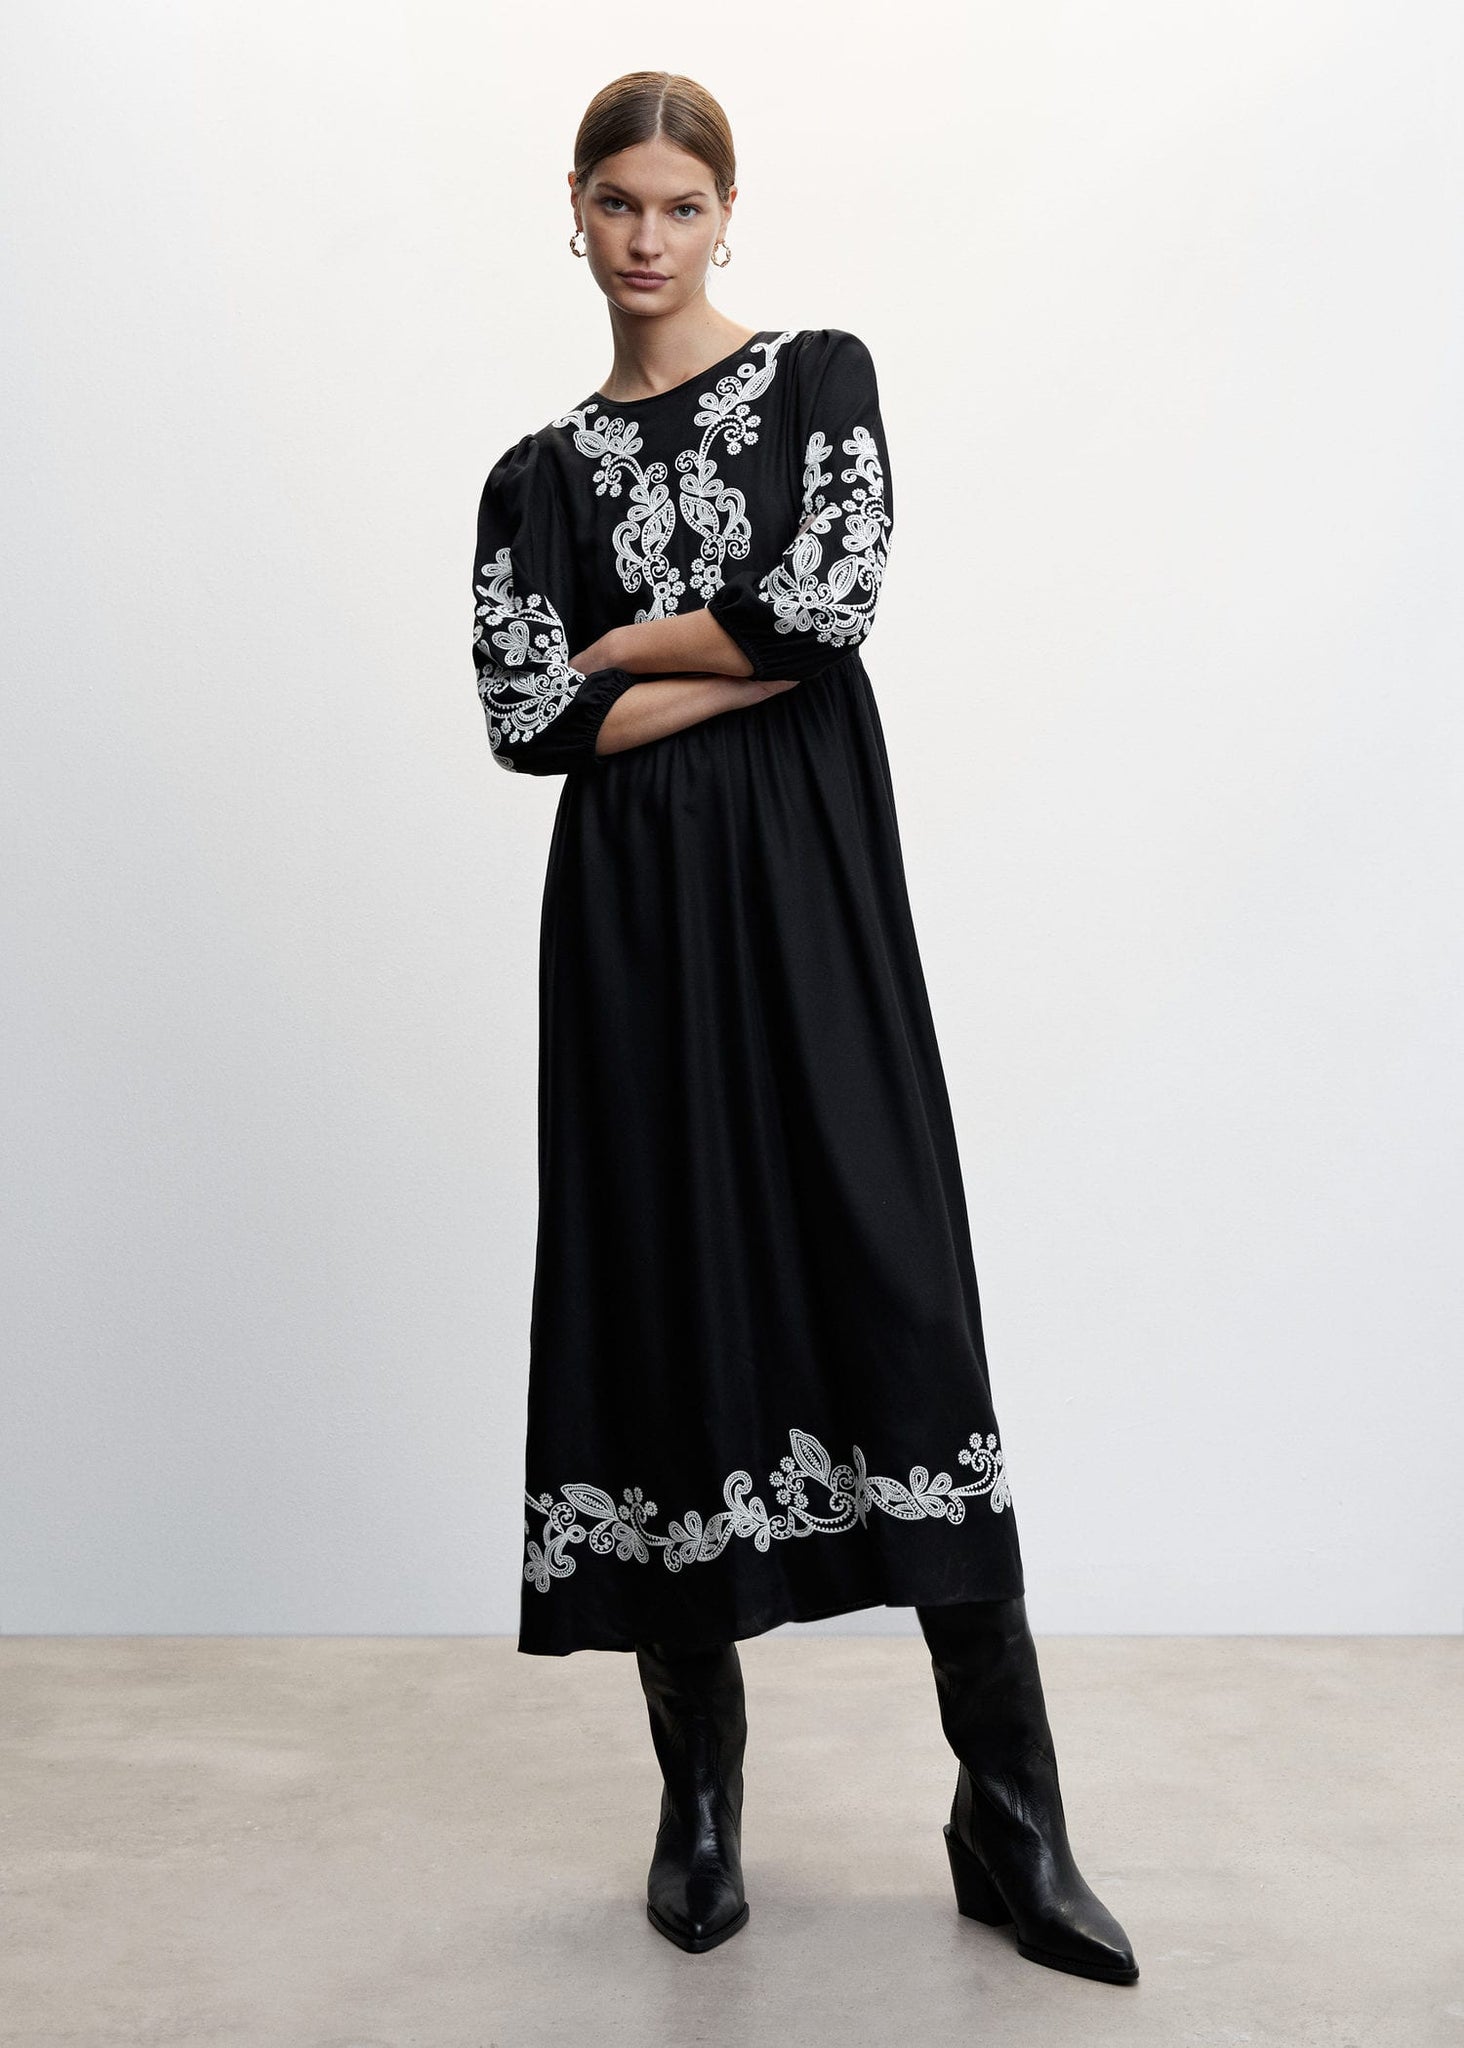 Ethnic embroidery dress - General plane